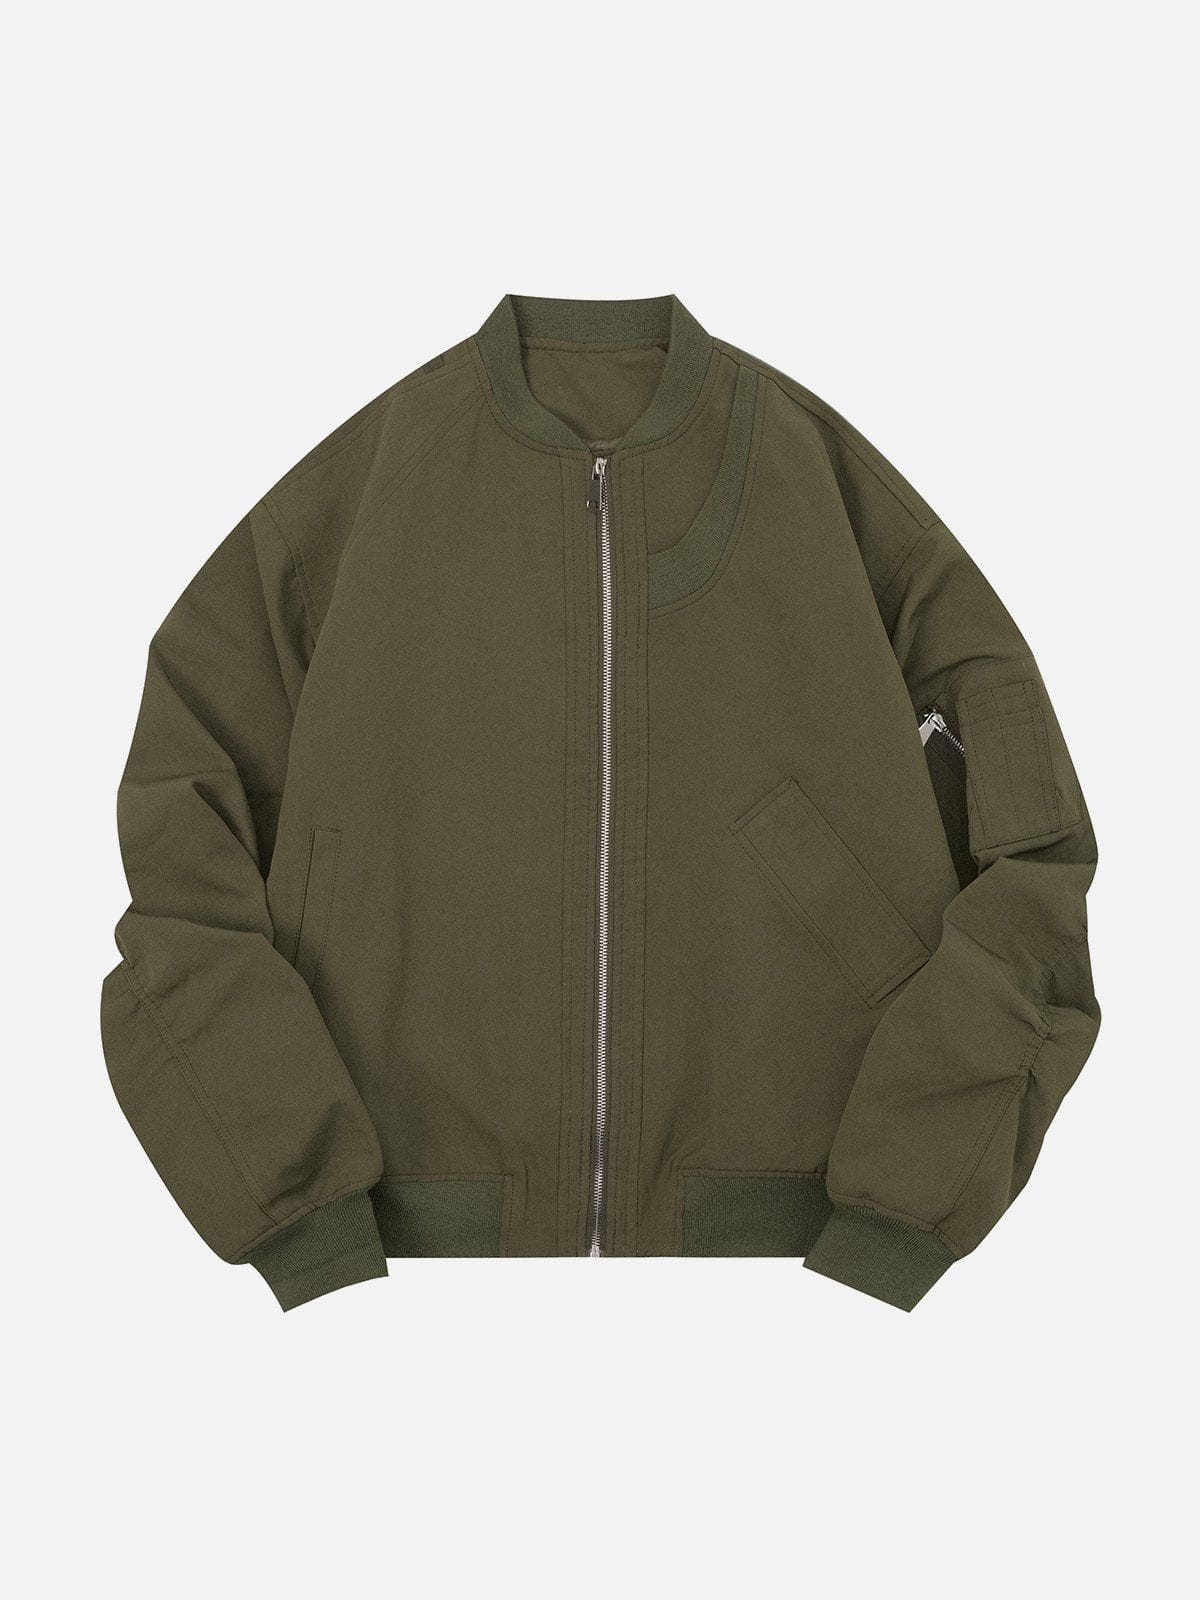 Sneakerland™ - Solid Pleated Jackets